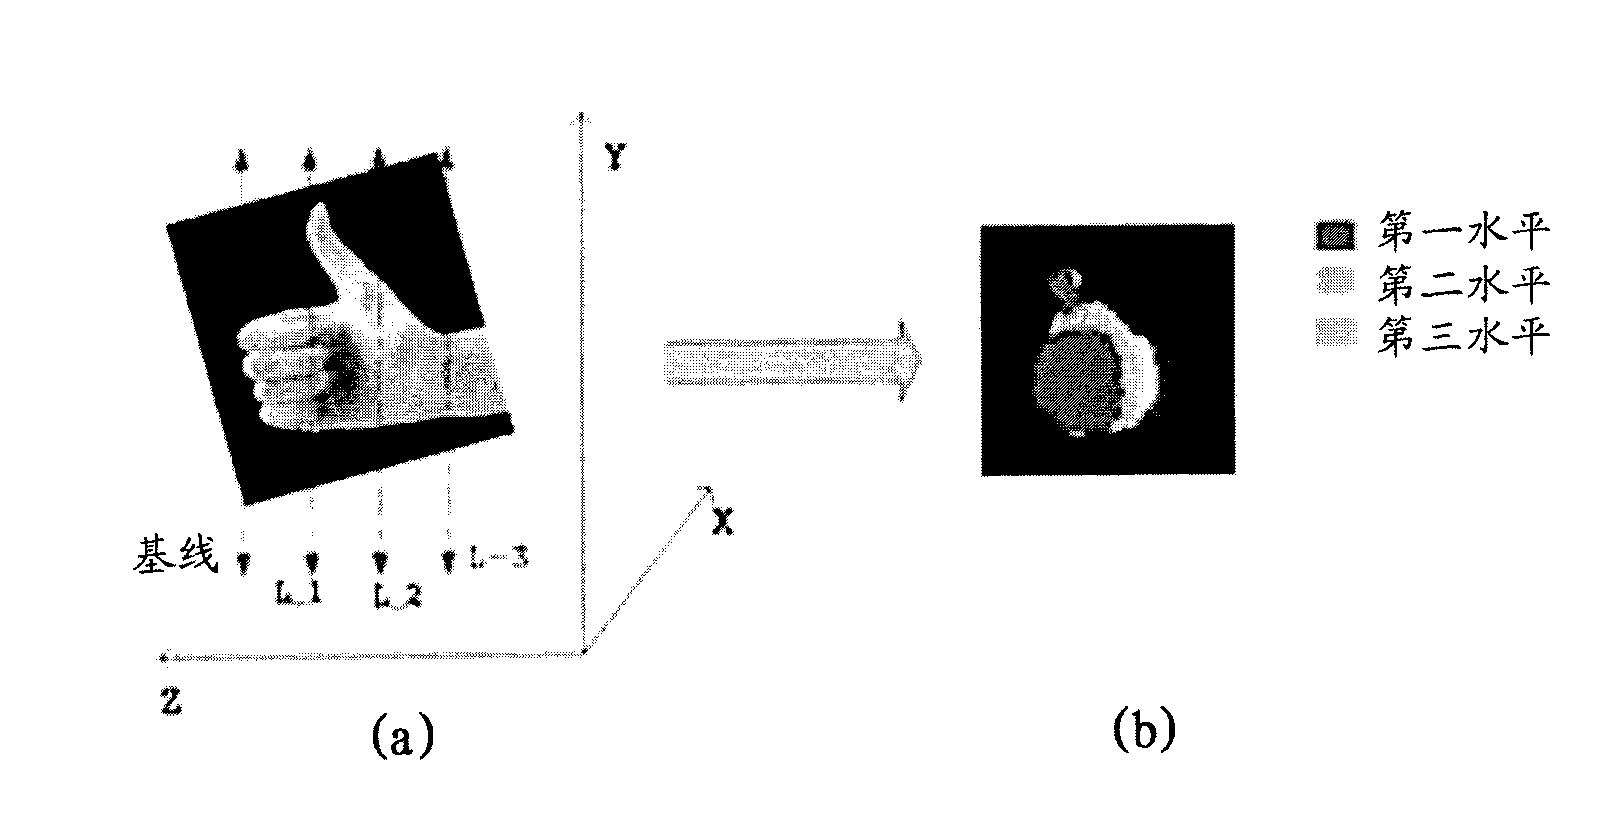 Three-dimensional gesture recognition method and system